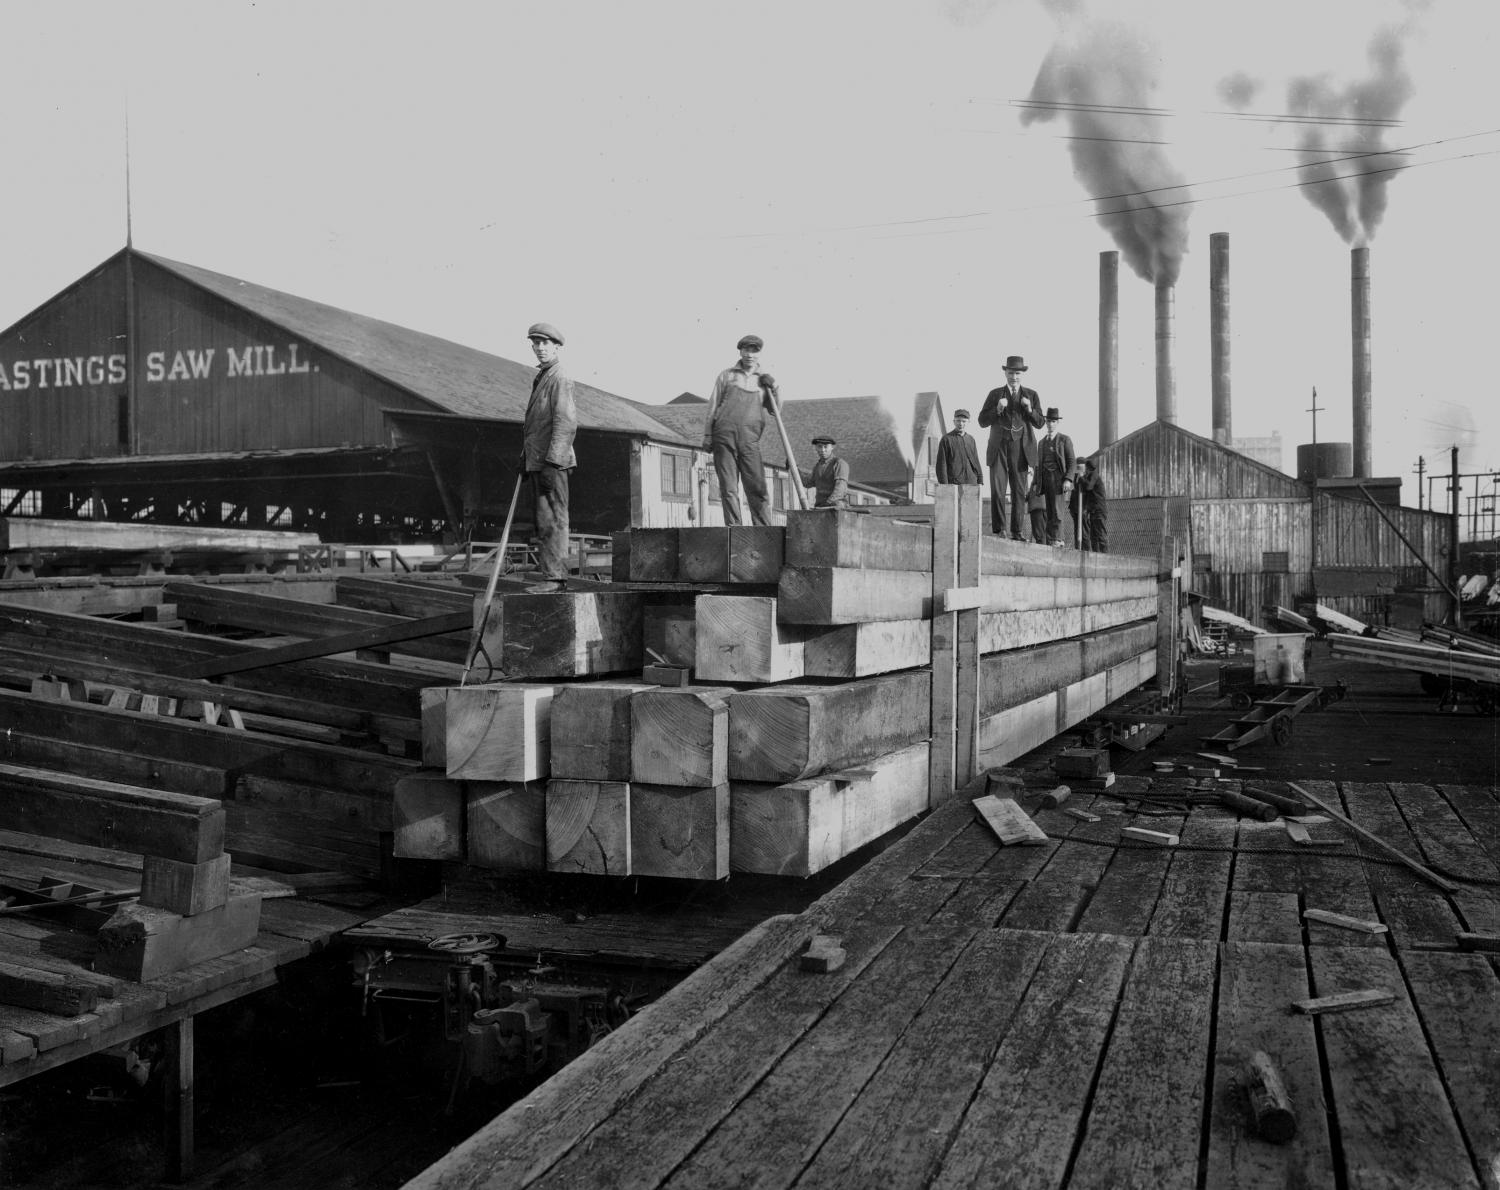 Large timbers being loaded onto flat cars at Hastings Sawmill, Chinese men working, Strathcona, Vancouver, B.C.